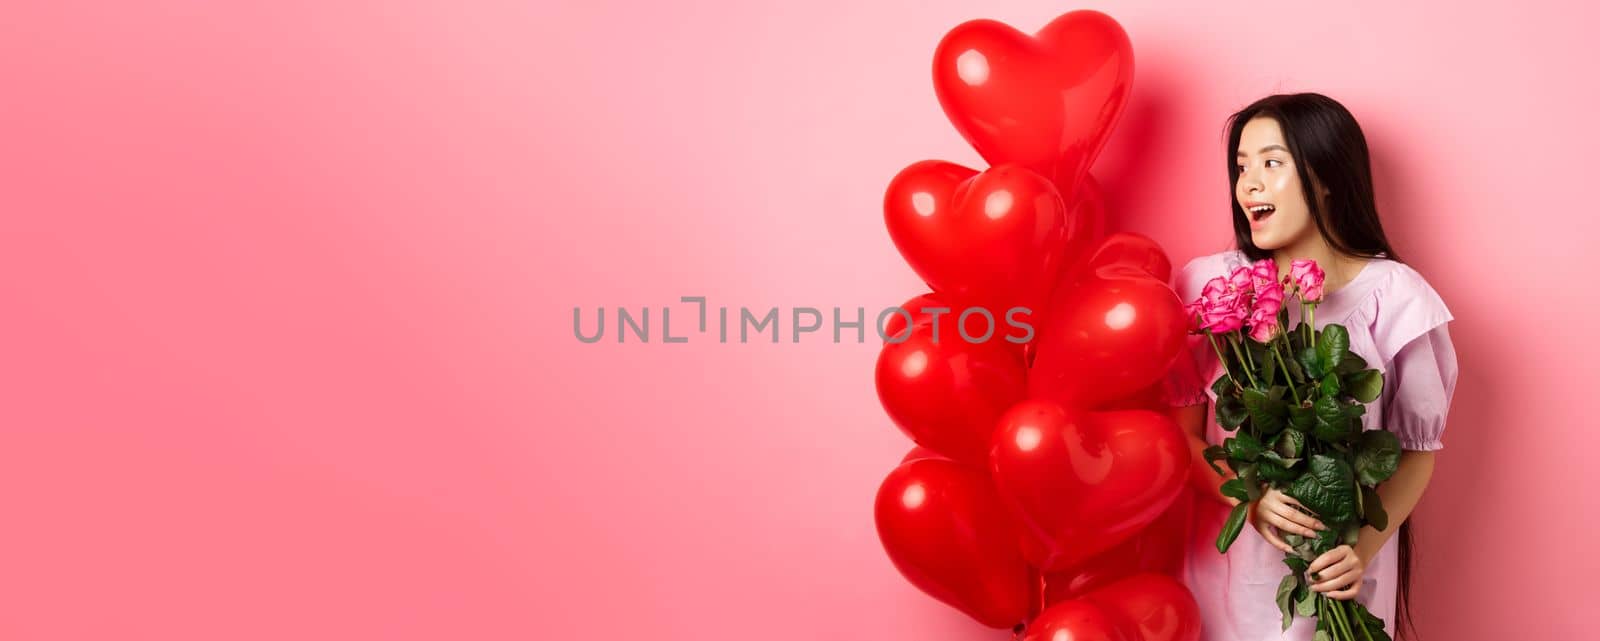 Portrait of asian teenage girl in love, holding flowers and looking at valentines day heart balloons, being on romantic date, pink background.